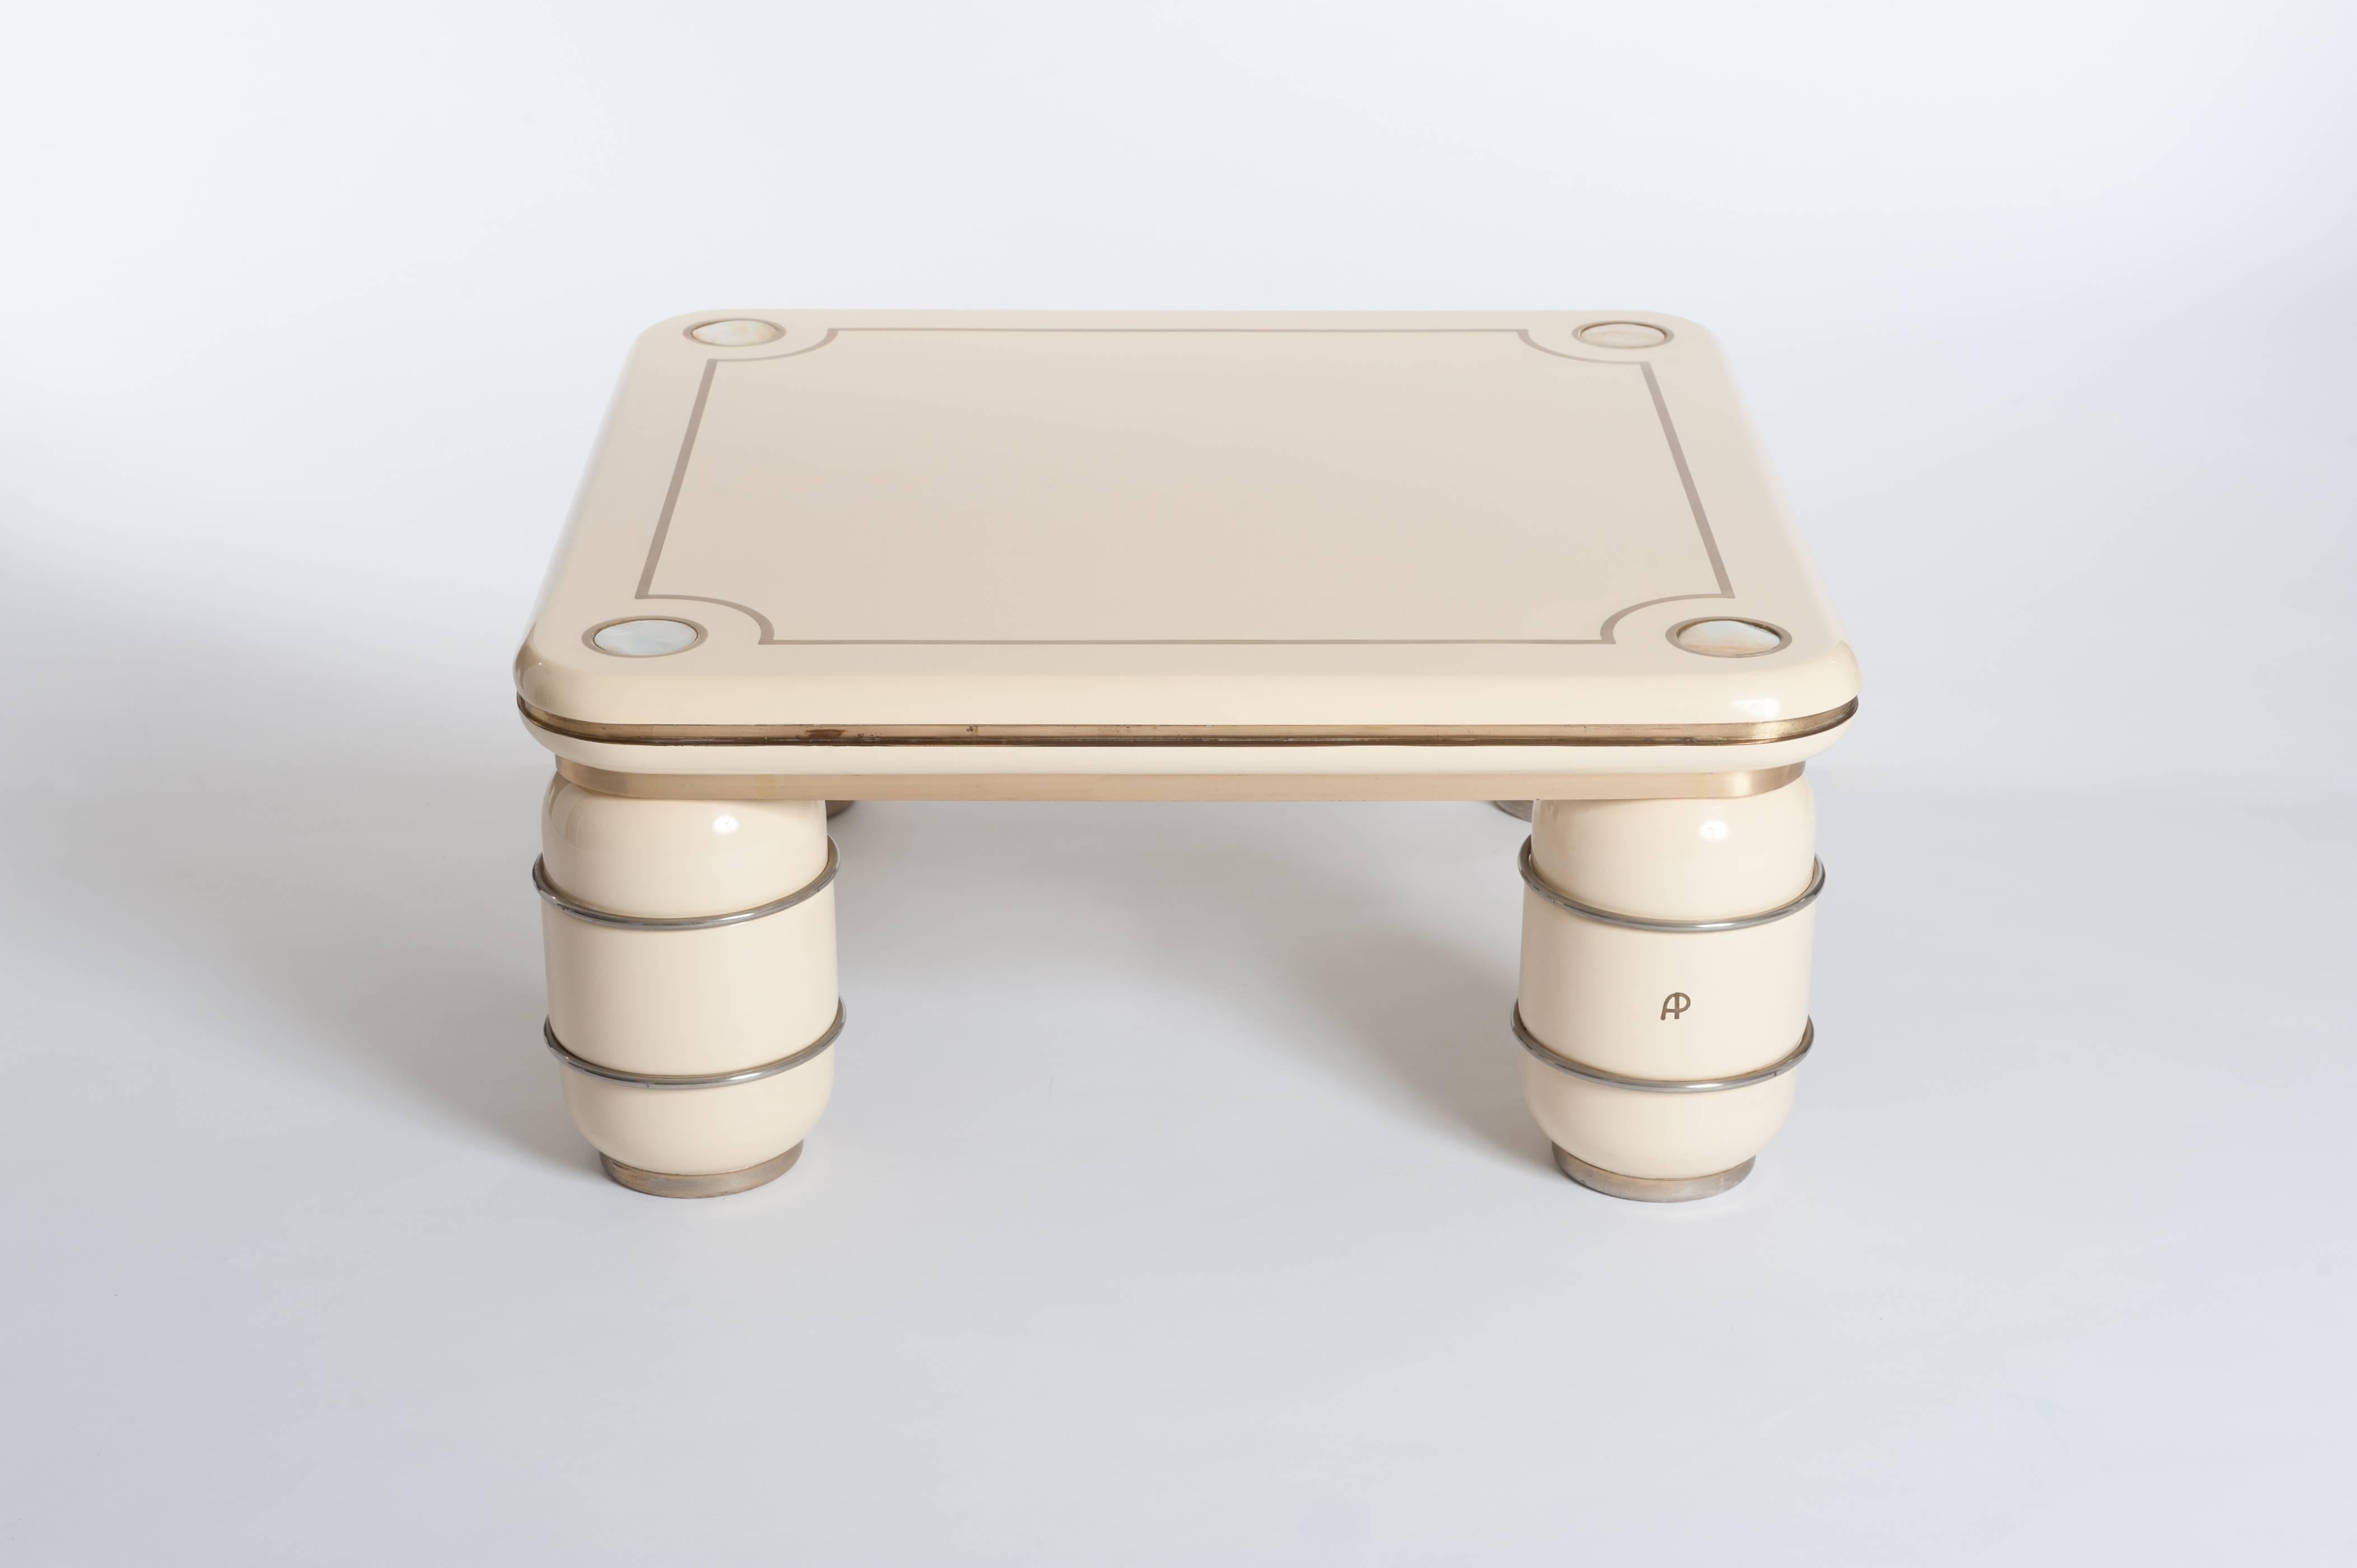 Beautiful Italian design by Antonio Pavia, signed AP (for Romeo Rega)
Pastel-colored lacquer, fine inlays of brass and mother-of-pearl, the feet are decorated with small metal borders.